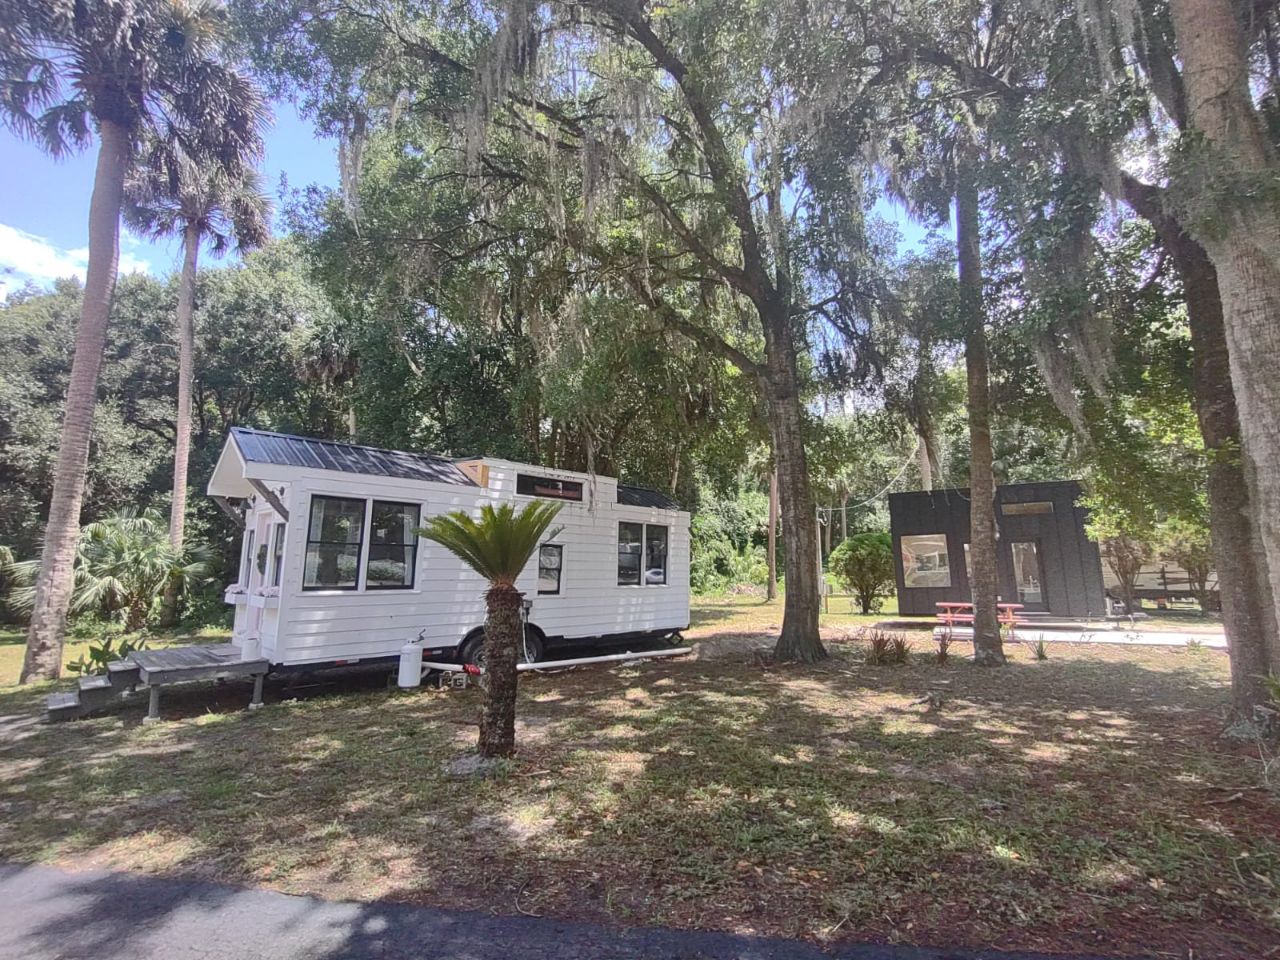 We Are a Growing Tiny House Community. Bring Your Tiny House To Citra Royal Palm RV Park